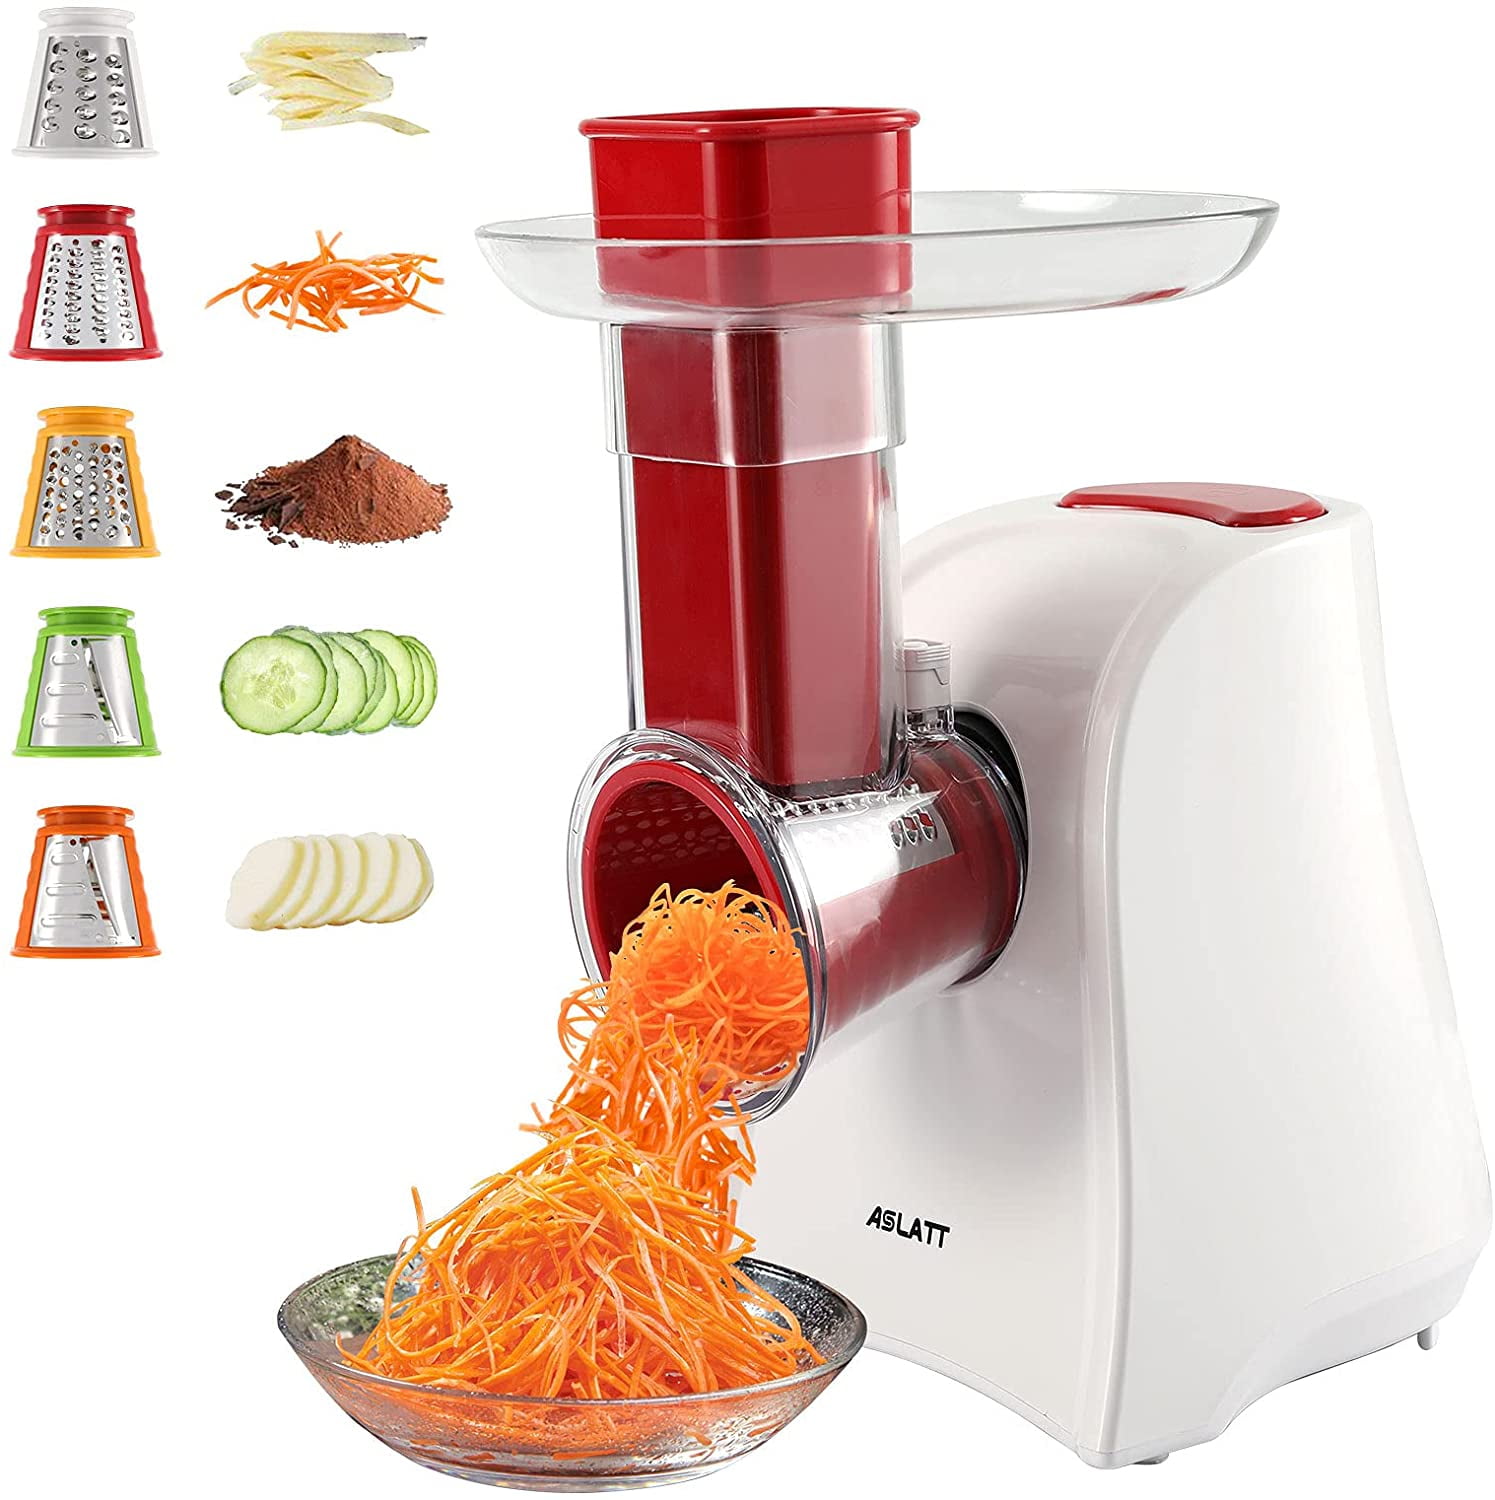  Mokero Automatic Electric Vegetable Grater 5 in 1